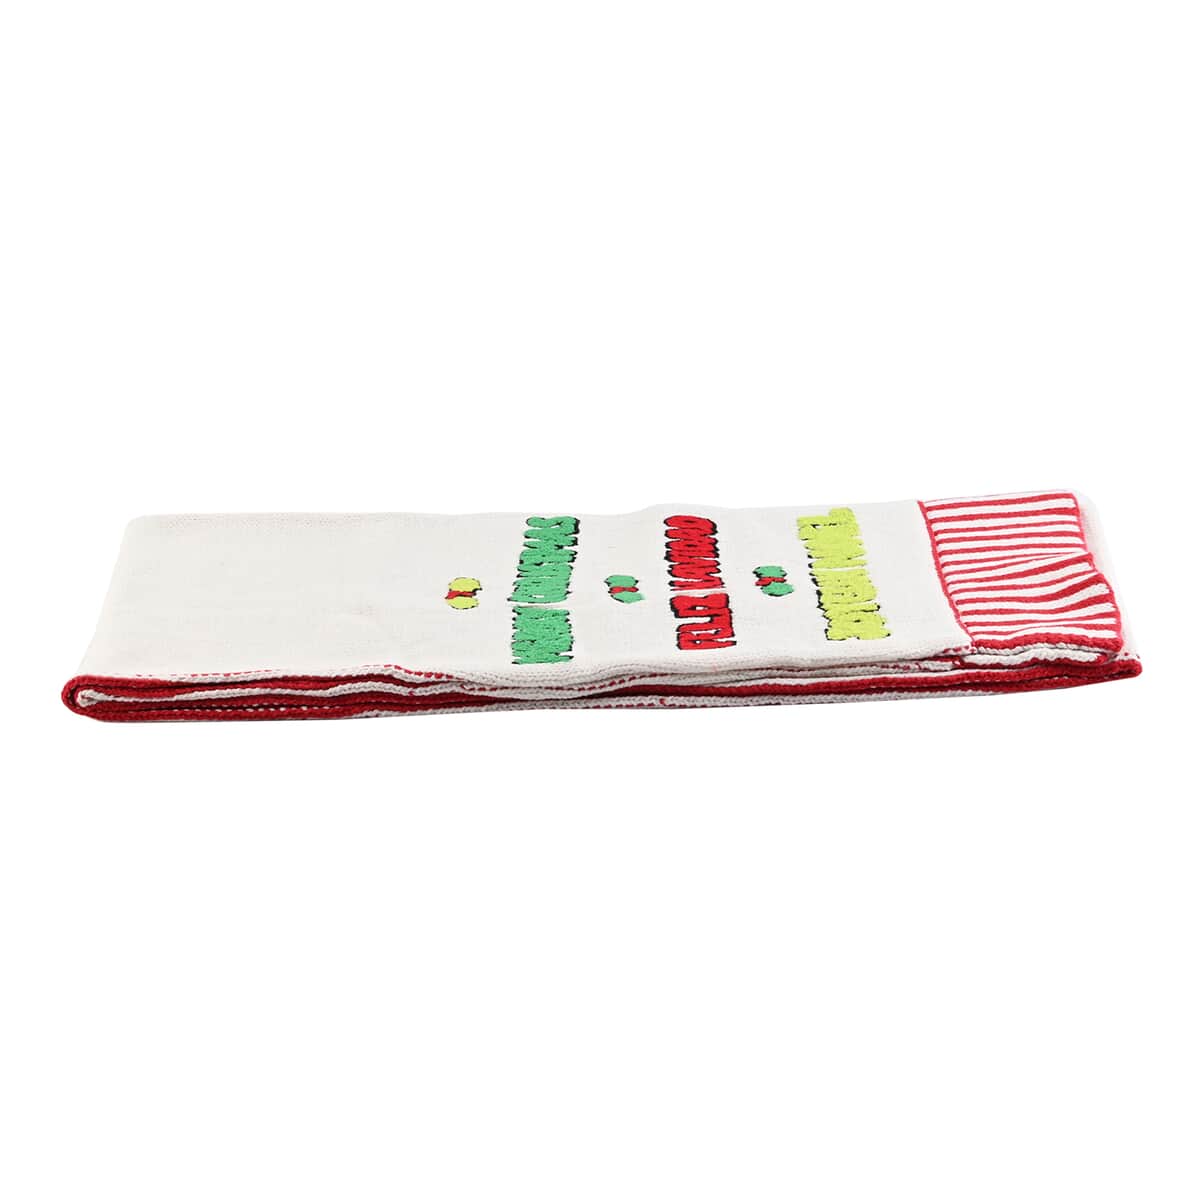 WHOOPI GOLDBERG Holiday Collection Merry Christmas Greetings Scarf - One Size Fits Most (MADE IN THE USA) image number 2